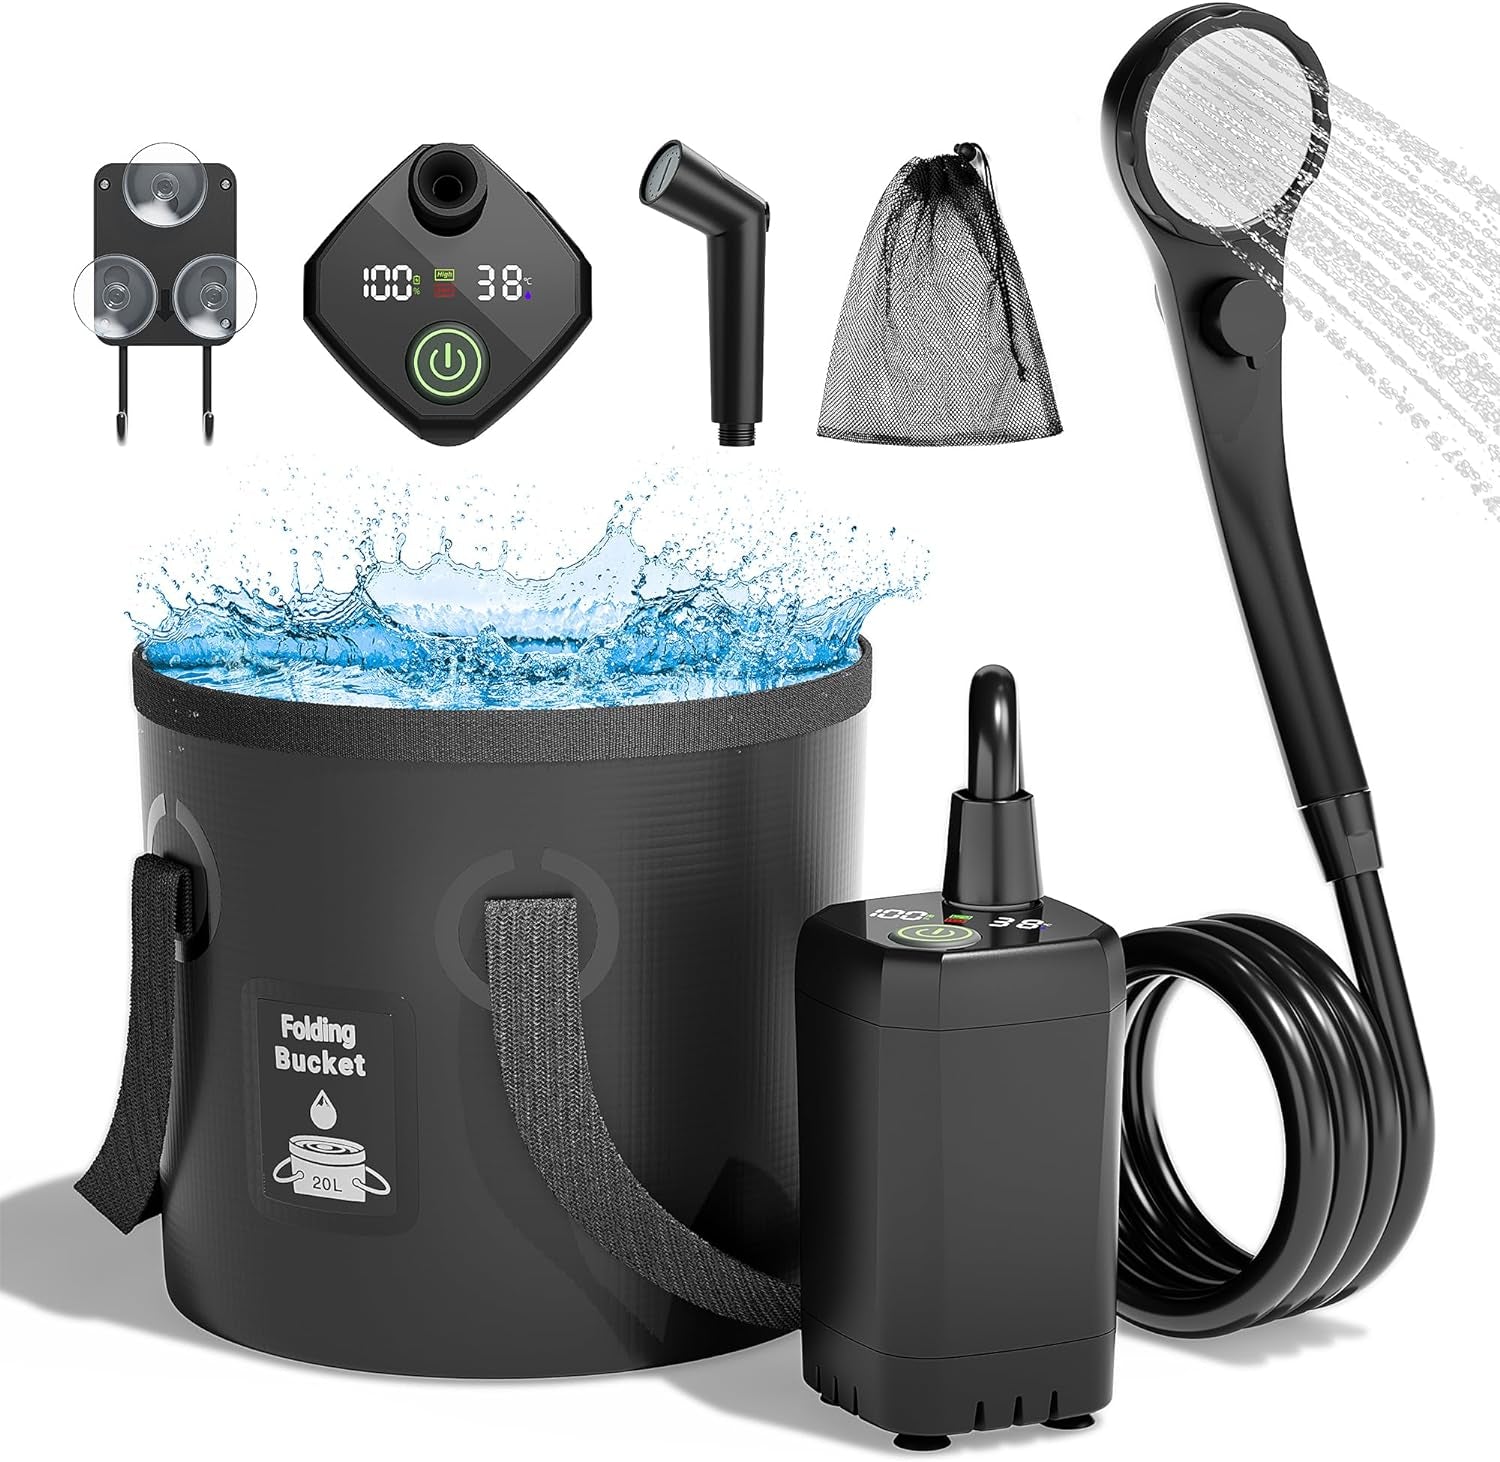 Portable Camping Shower, 6000mAh Rechargeable Shower Pump, Filtered Shower Head & 5 Gallons Foldable Bucket, Outdoor Shower for Hiking, Beach, Travel, Pet Bath, Car Washing, Surf & Boat Cleaning